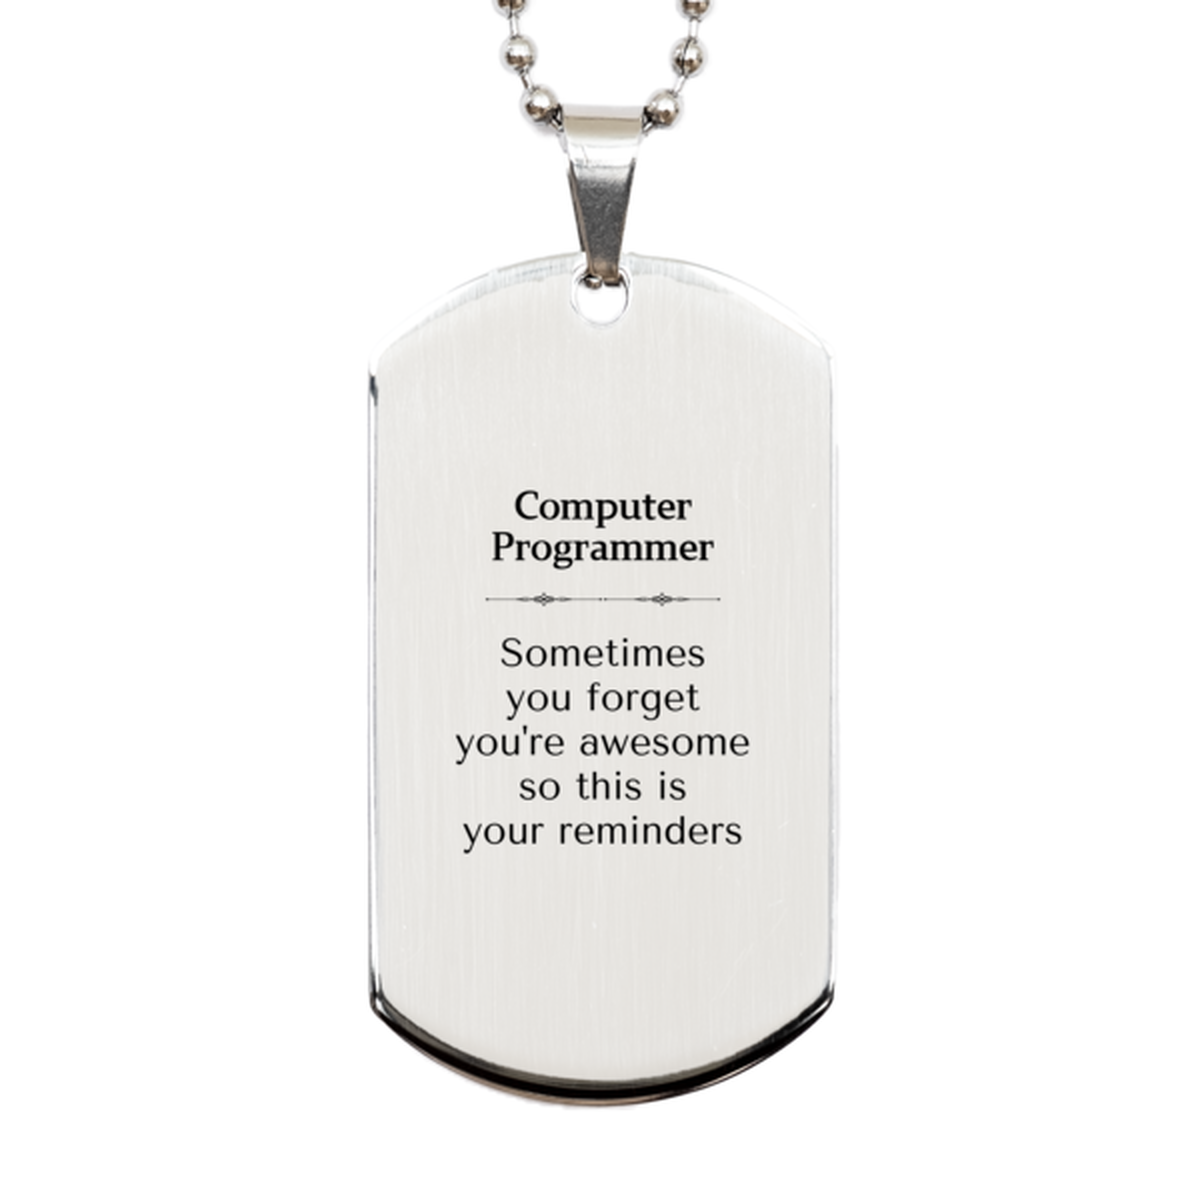 Sentimental Computer Programmer Silver Dog Tag, Computer Programmer Sometimes you forget you're awesome so this is your reminders, Graduation Christmas Birthday Gifts for Computer Programmer, Men, Women, Coworkers